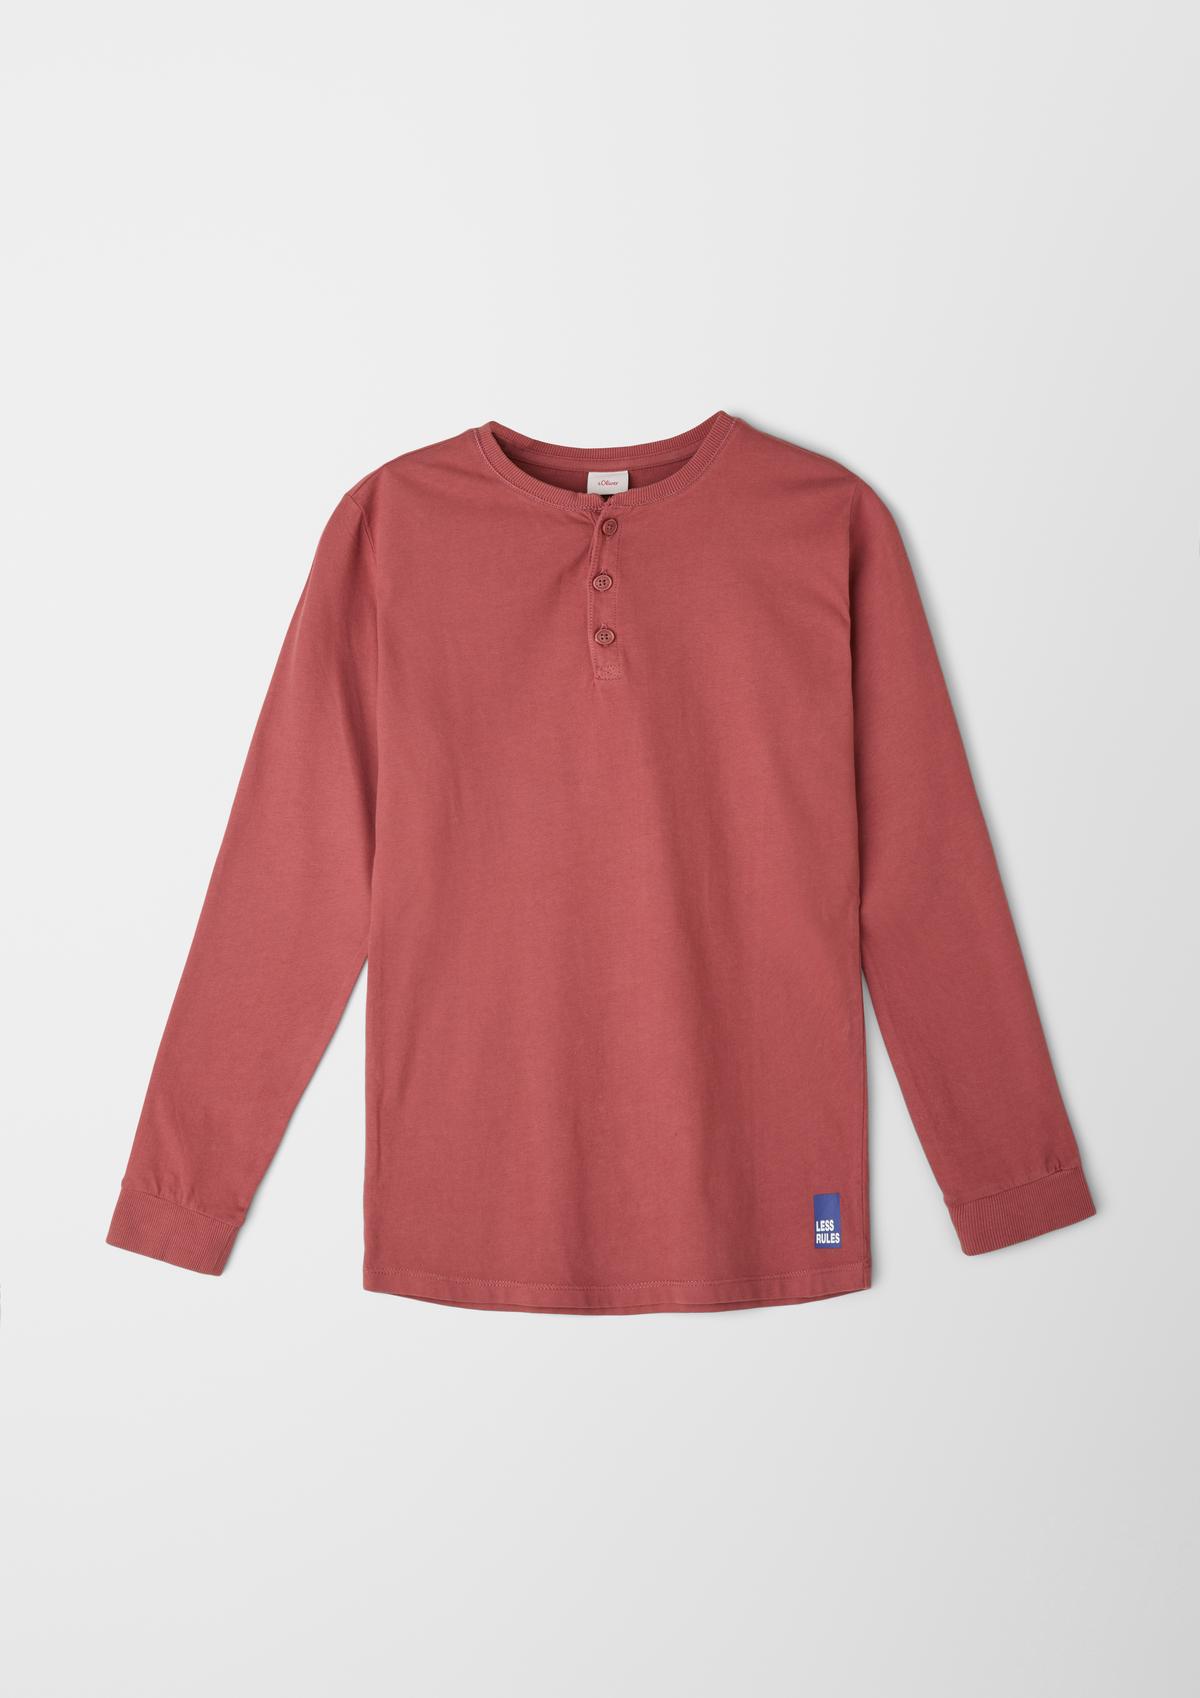 s.Oliver Long sleeve top with a Henley neckline